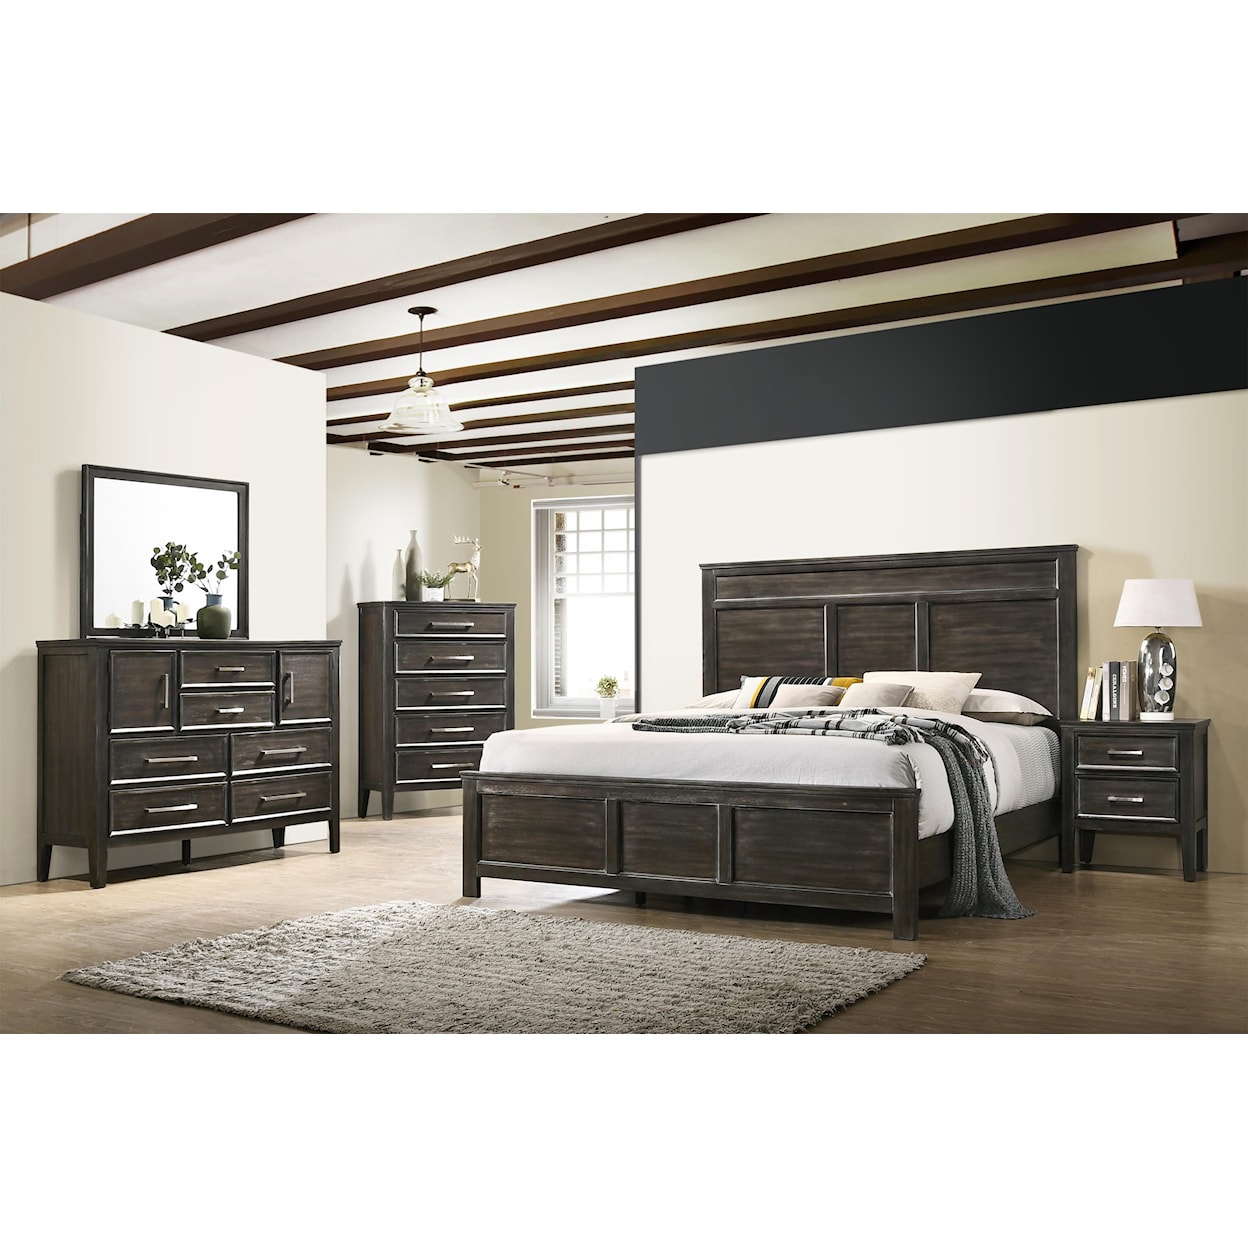 New Classic Andover King Bedroom Group